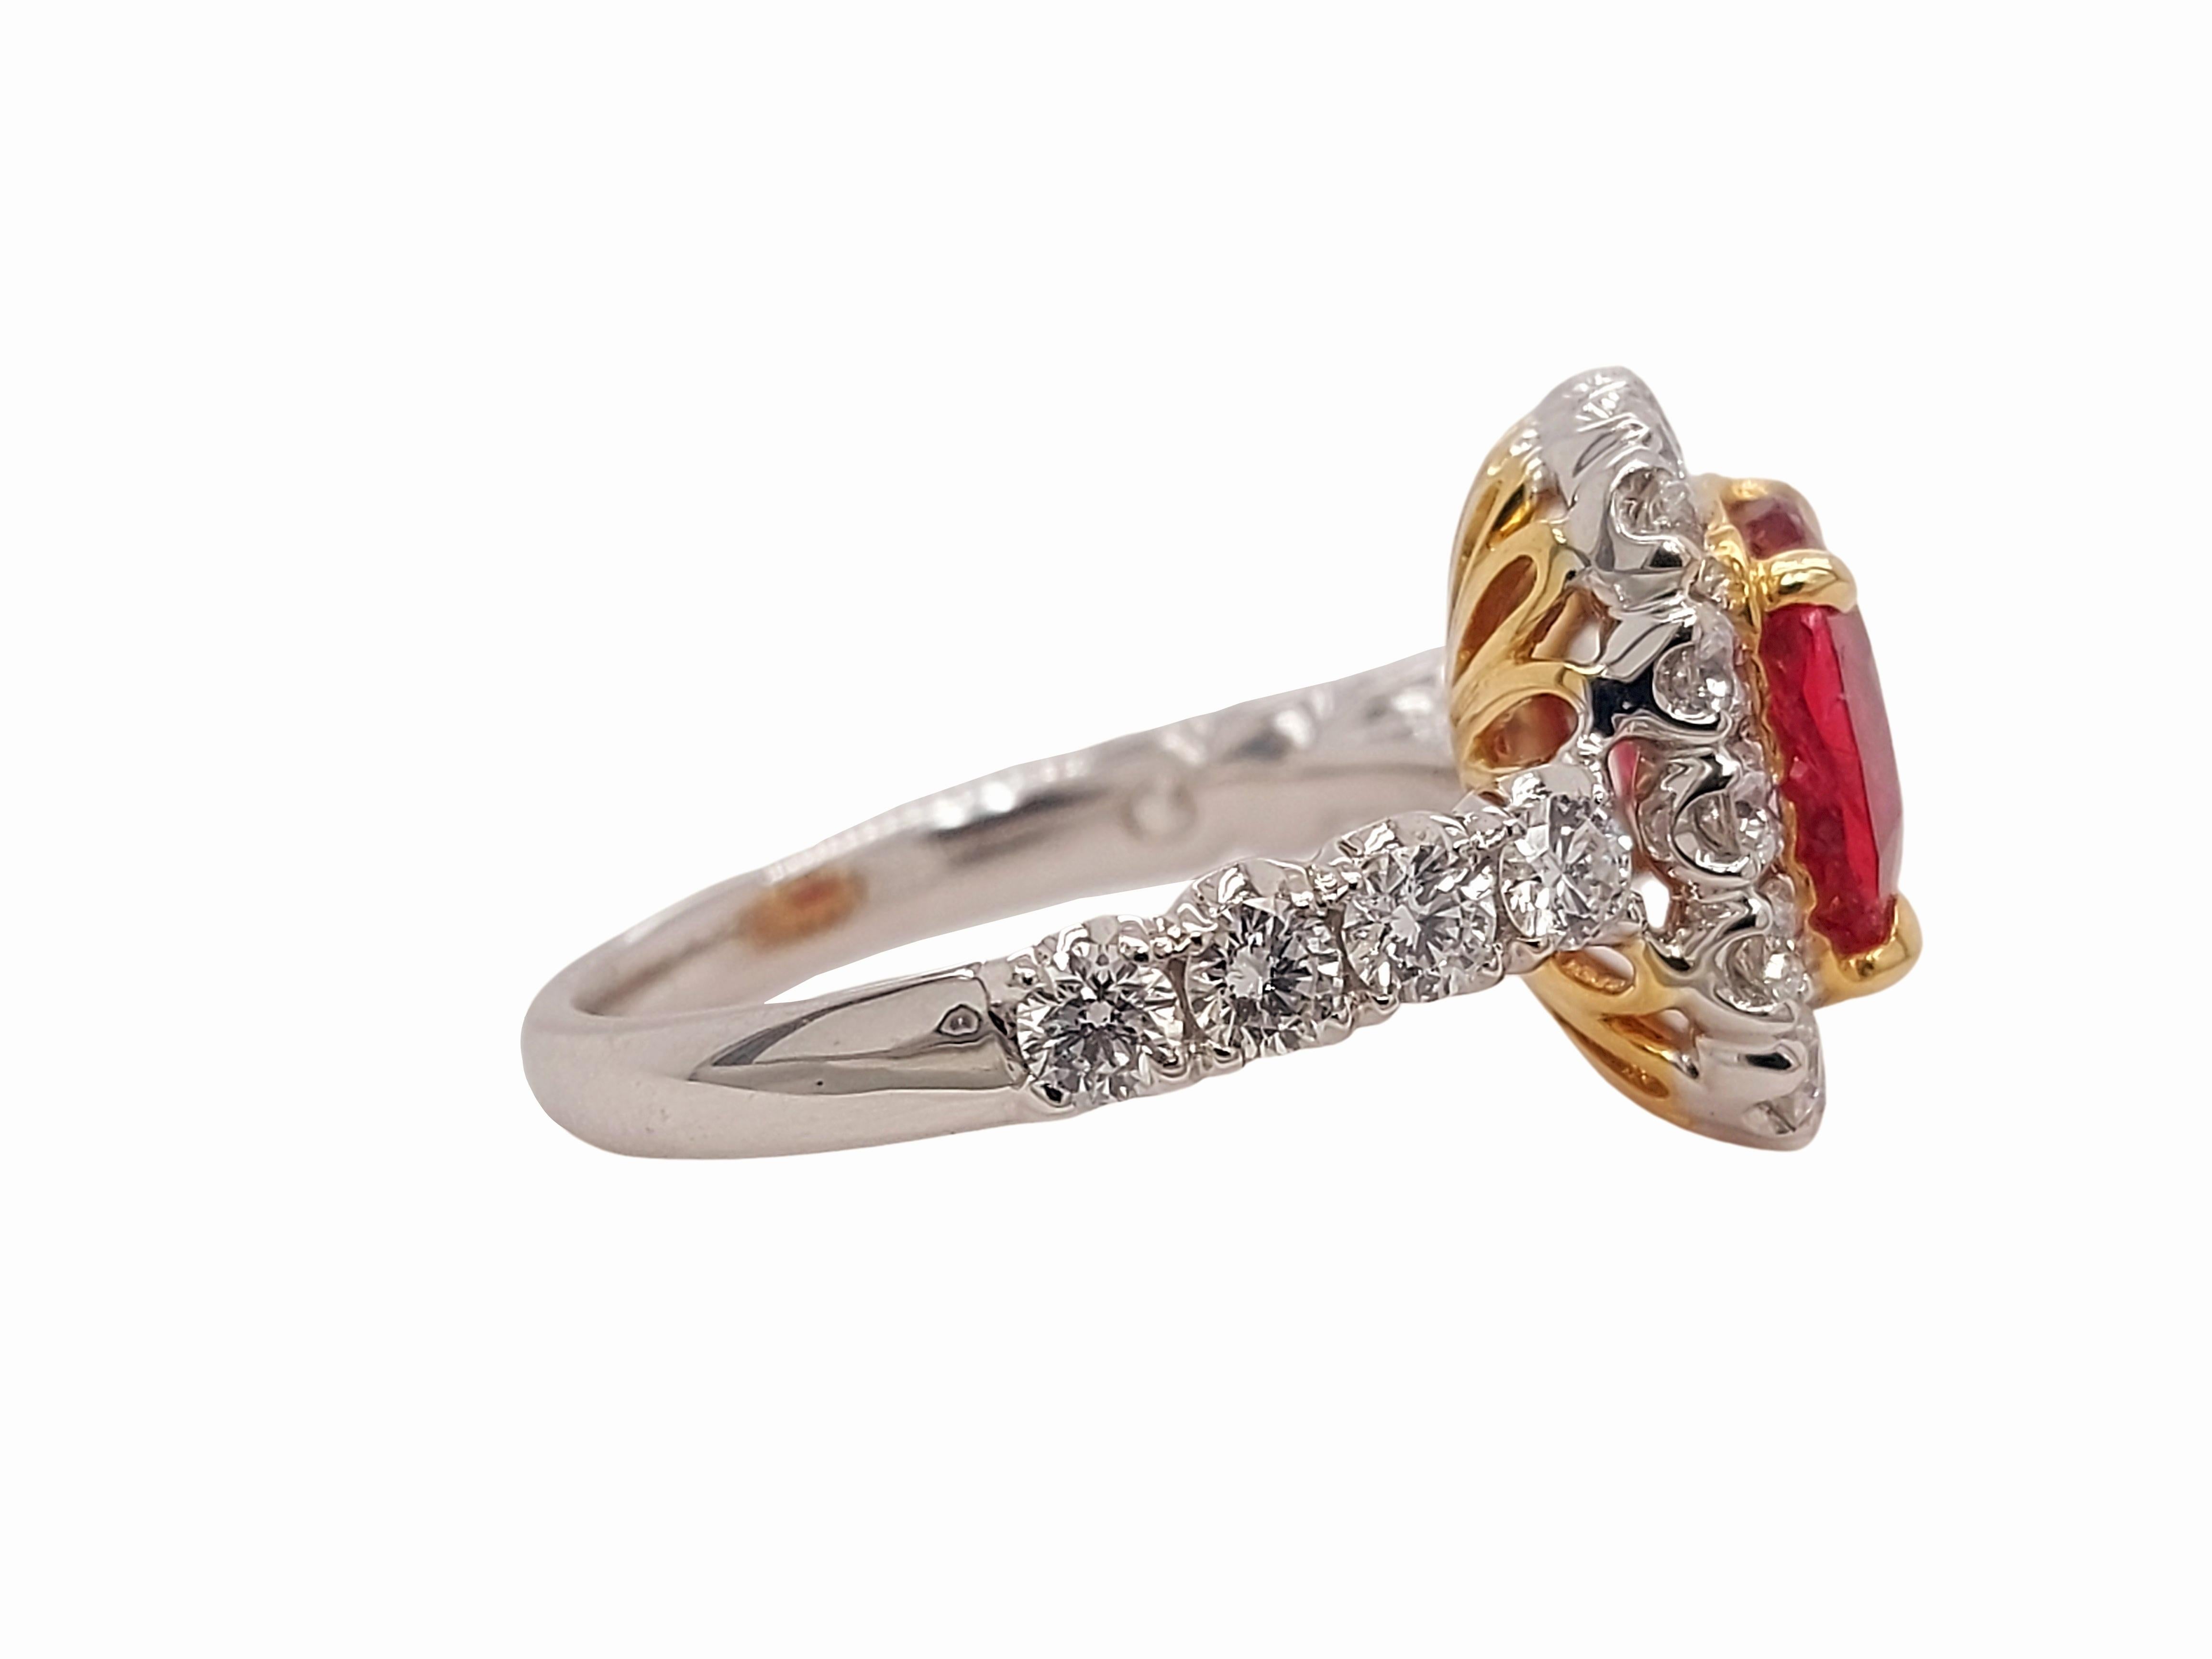 Artisan 18kt White Gold 4 Ct No Heat Vivid Ruby Ring, 1.5 Ct Diamonds, CGL Certificate For Sale